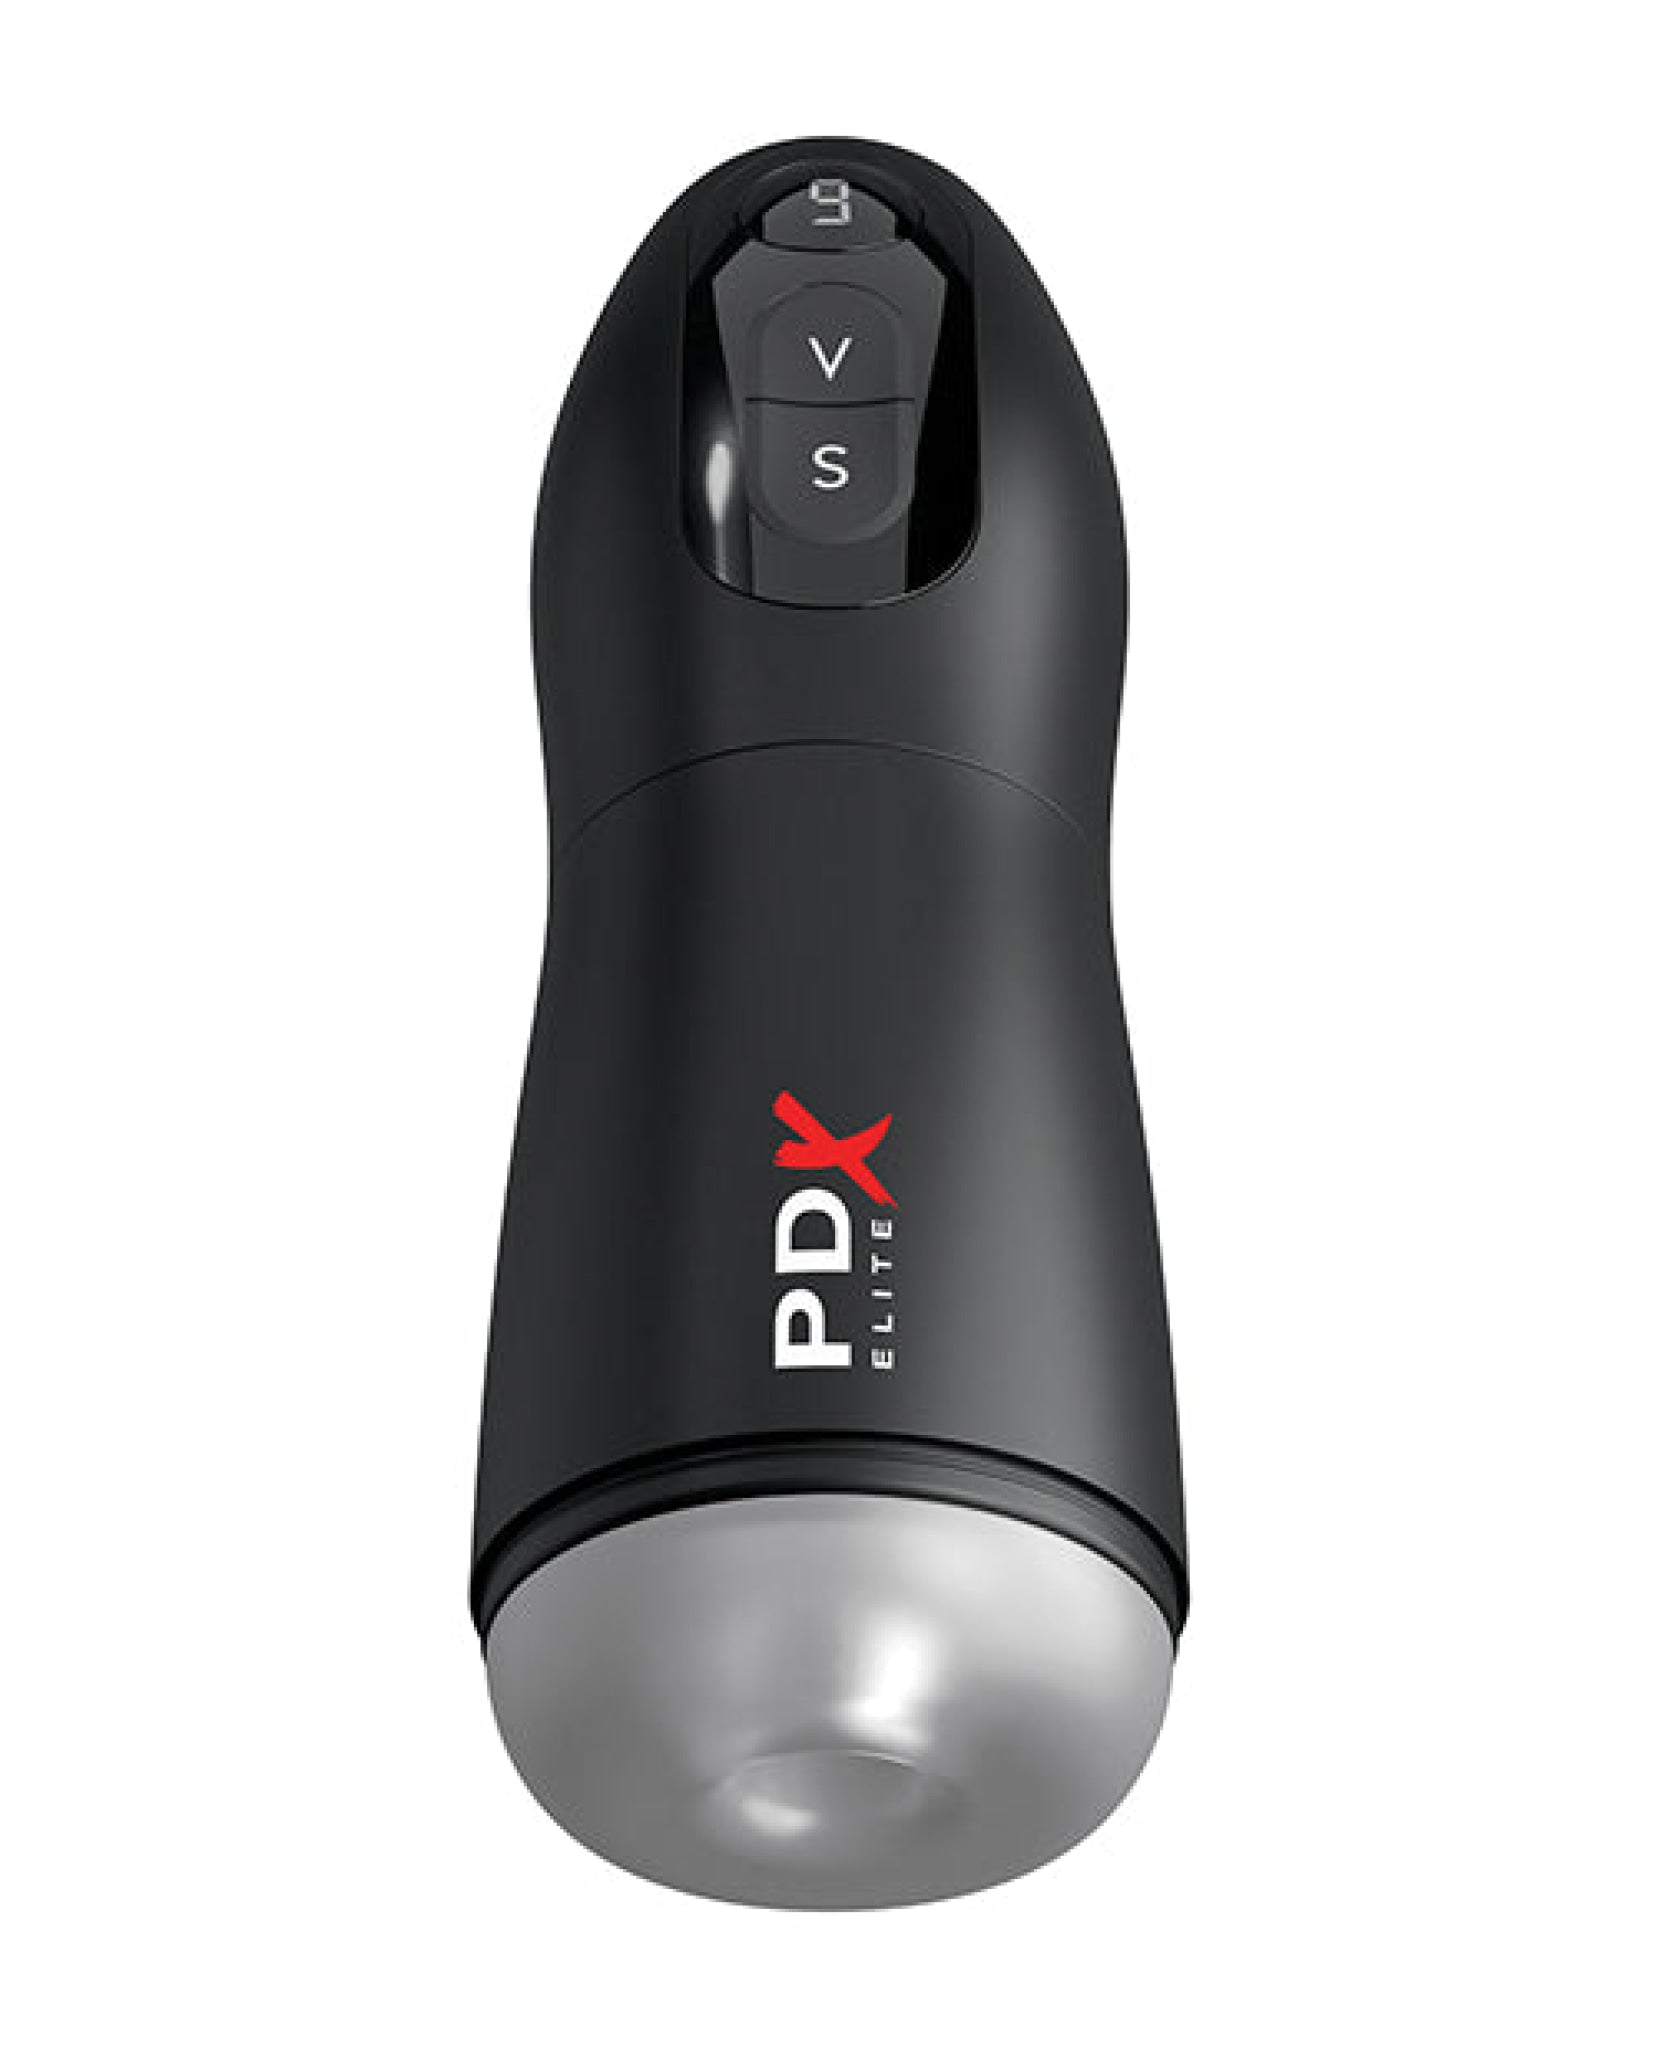 PDX Elite Suck-O-Matic Vibrating Stroker - Frosted/Black Pdx Brands